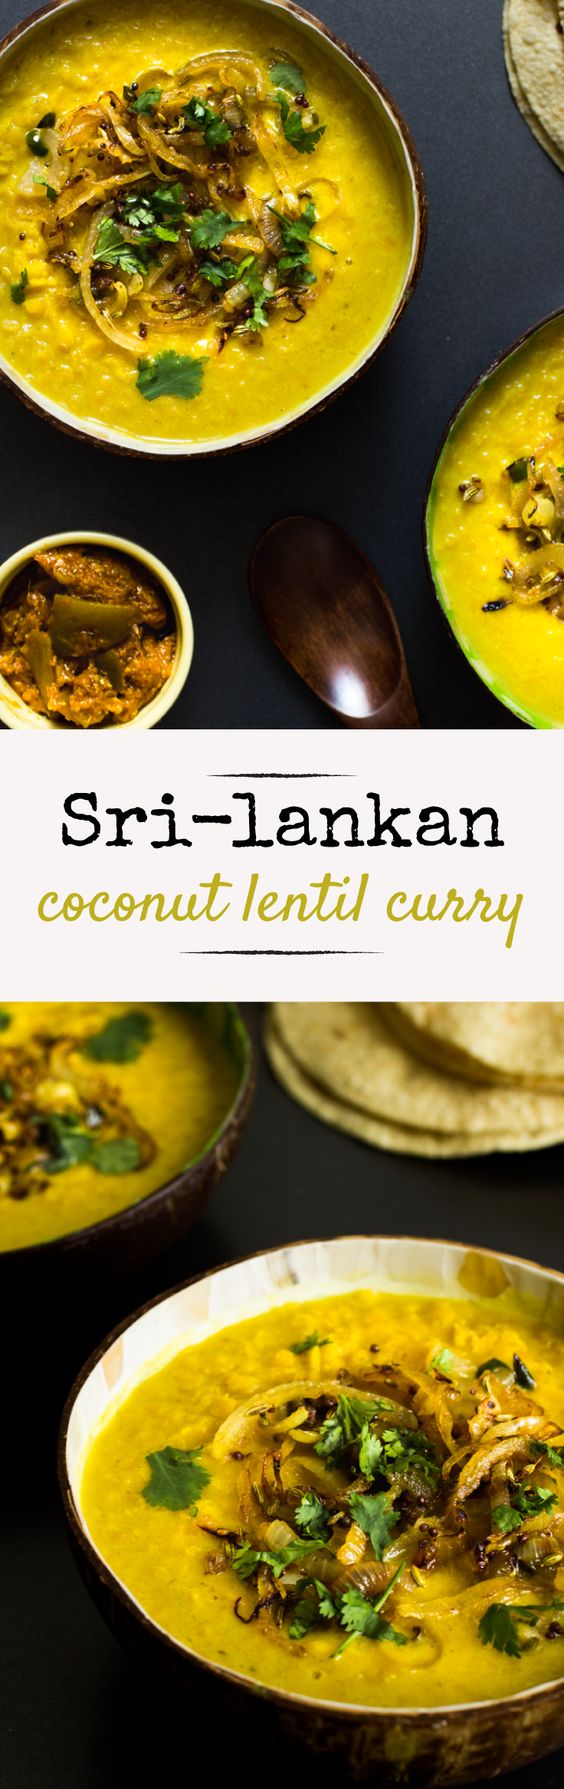 This vegan Coconut Lentil Curry is something my mum cooked at least once a week growing up. (She still does). It’s a staple curry among any Sri-Lankan household – probably down to it being so yummy and easy to do.